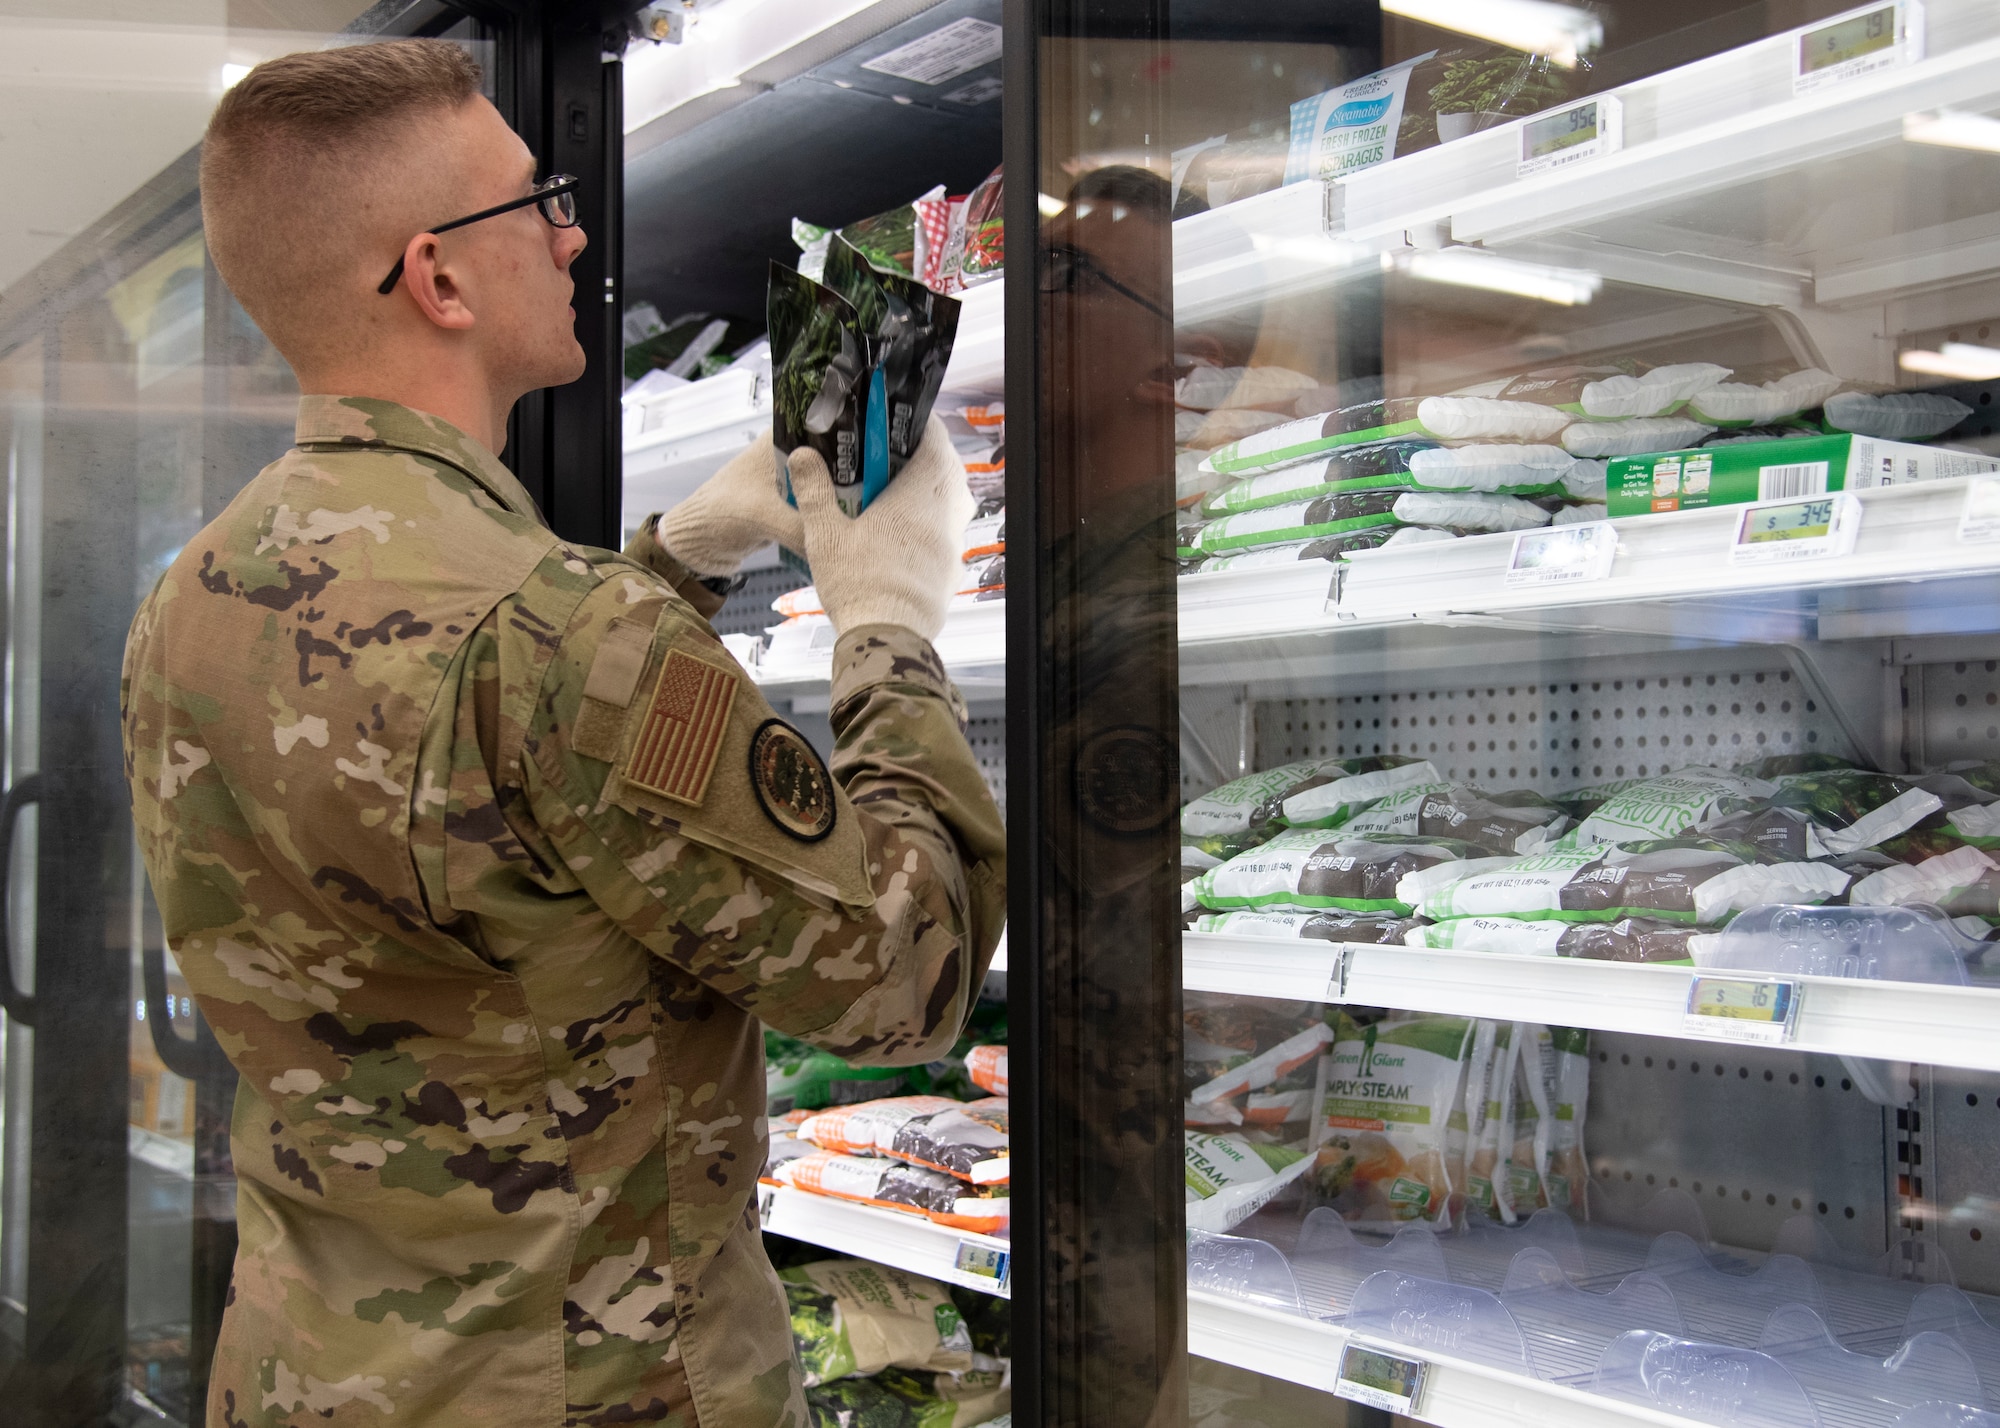 Airman 1st Class Daniel Piazza, 362nd Training Squadron crew chief apprentice course student, helps stock shelves at Sheppard Air Force Base, Texas, April 2, 2020. On March 25, 2020 all Department of Defense commissaries were deemed mission essential. To help out those who work the hardest to supply the base, Airmen in Training were sent from their squadrons to help with what they could. (U.S. Air Force photo by Senior Airman Pedro Tenorio)